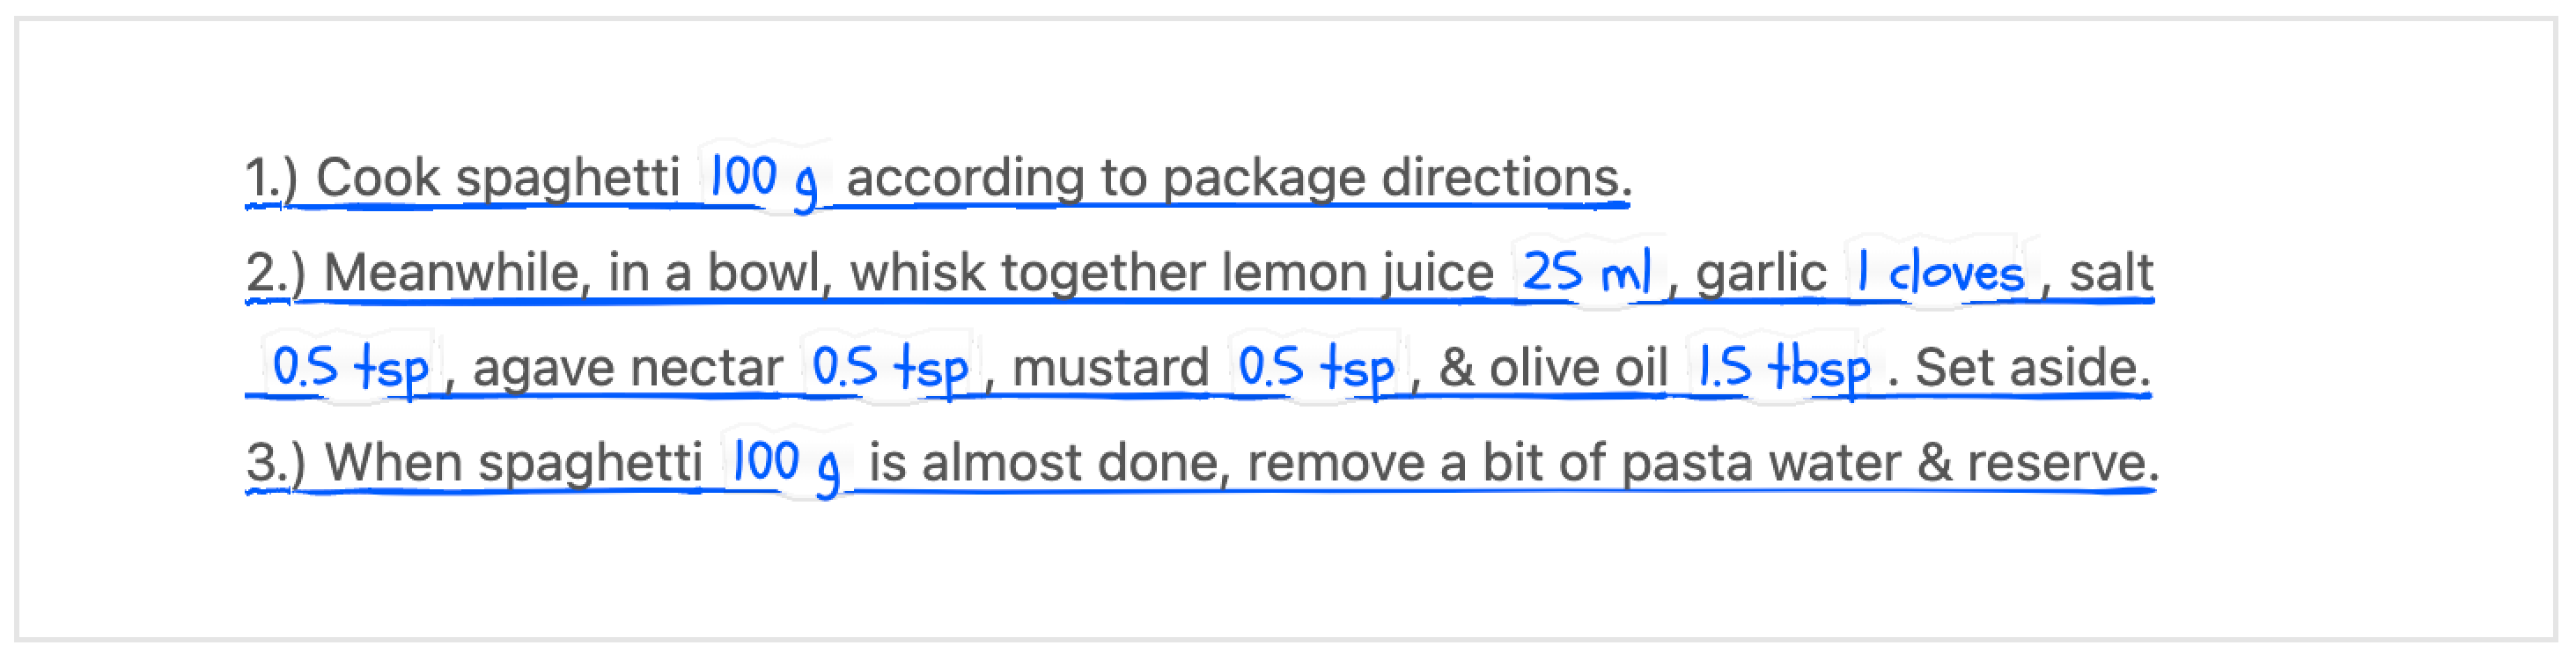 It&rsquo;s more convenient to follow a recipe when the quantities are shown inline in the directions.